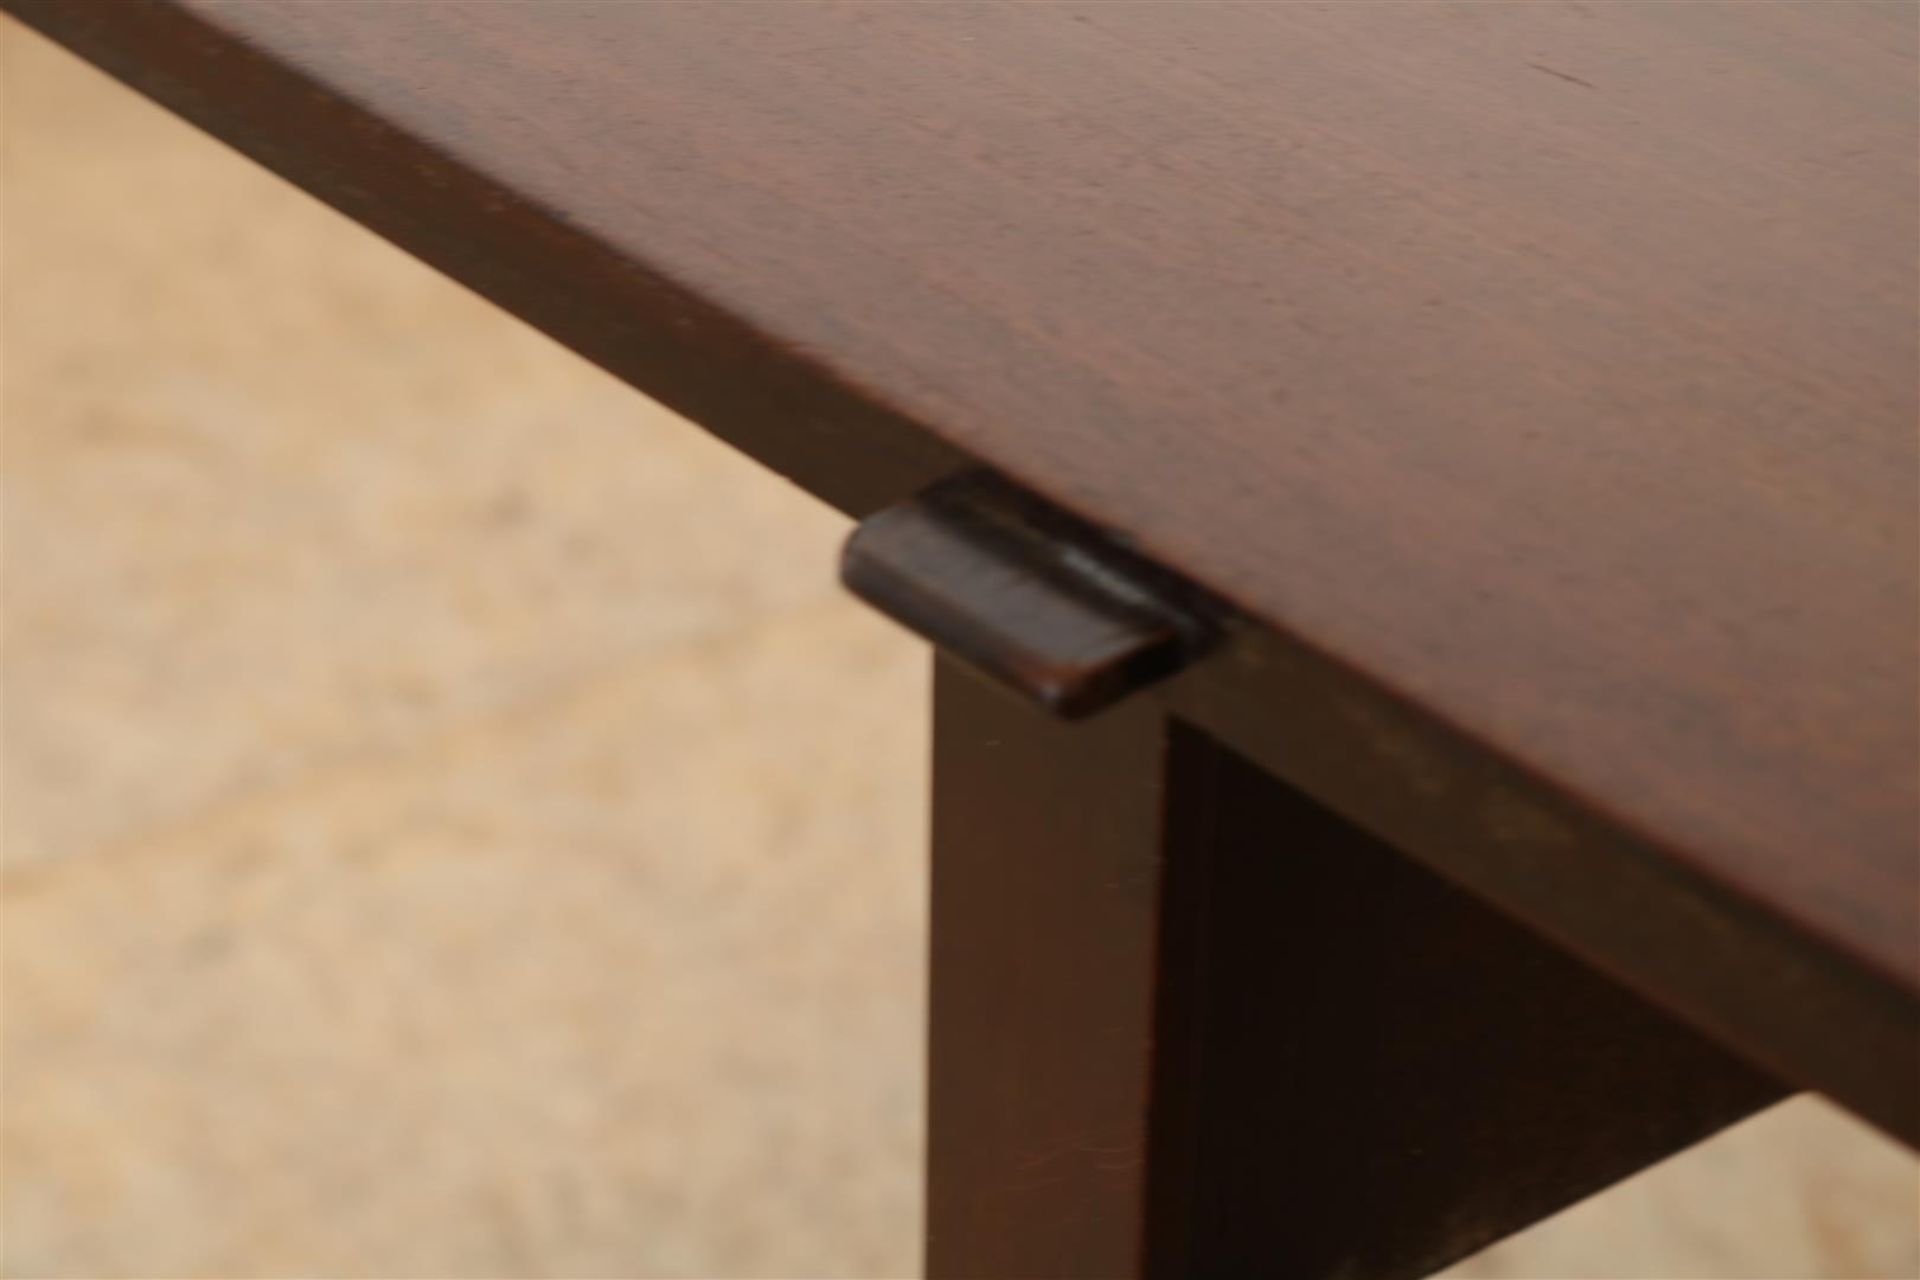 Mahogany drop-leaf table on block legs, 72 x 140 x 124 cm. (scratches on page) - Image 5 of 5